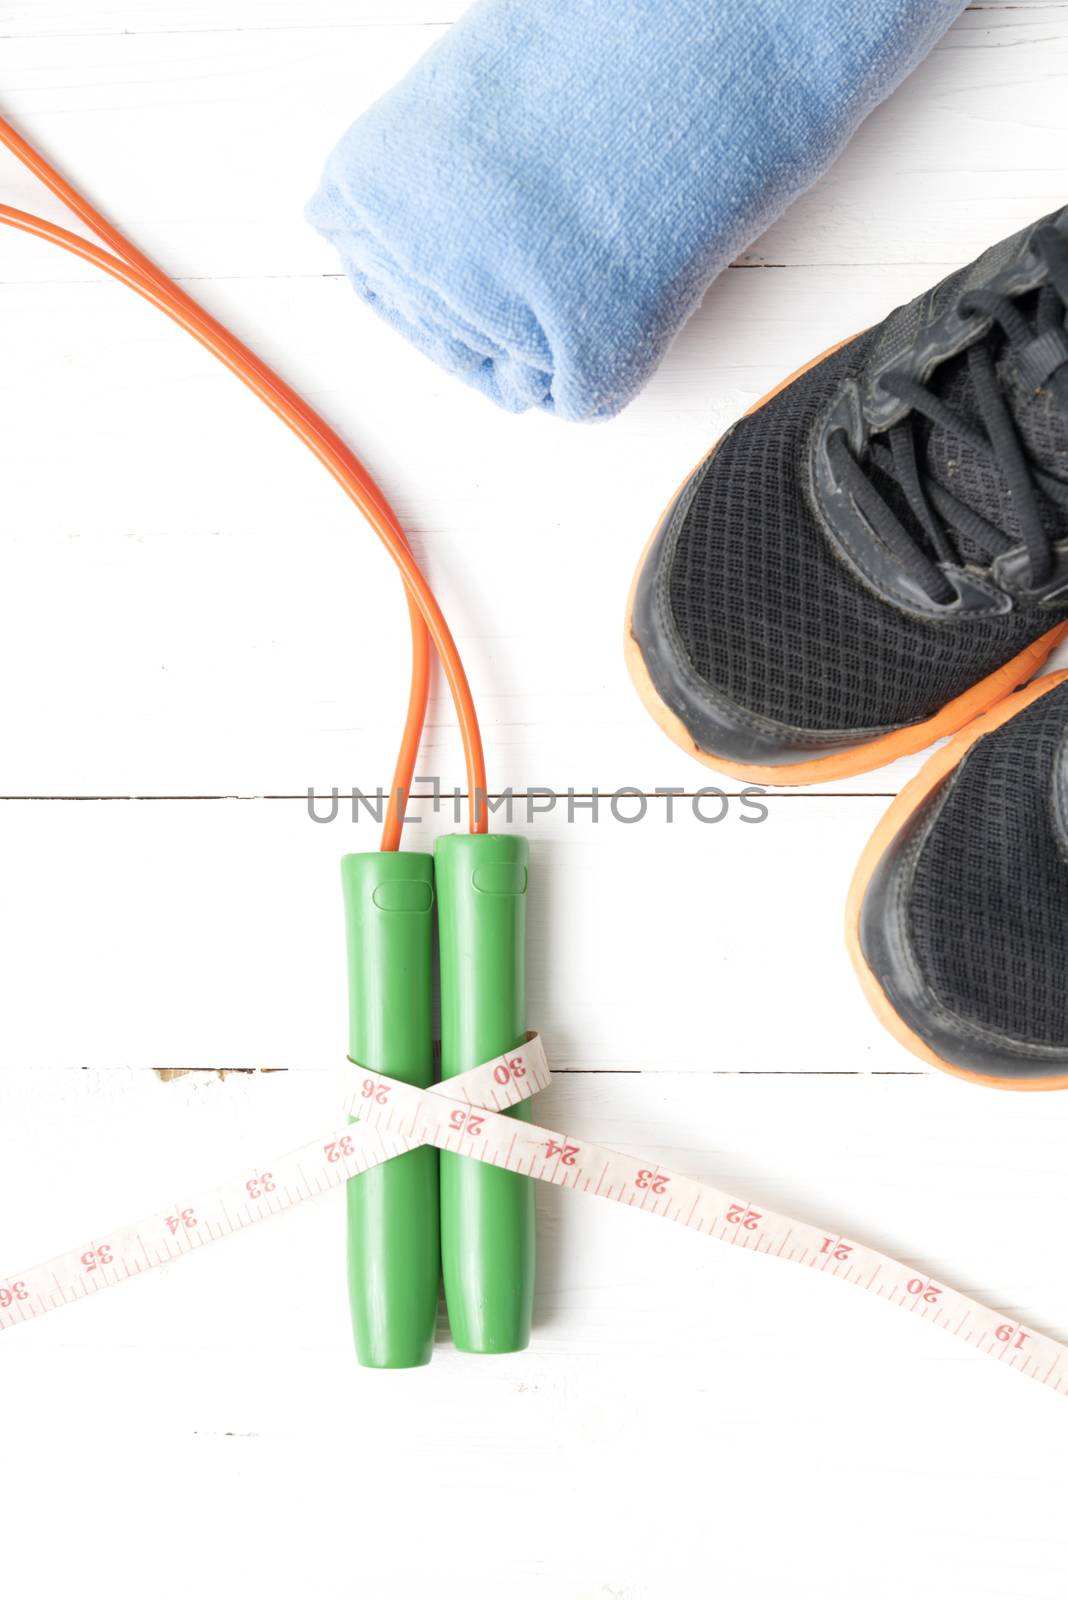 fitness equipment : running shoes,towel,jumping rope and measuring tape on white wood table